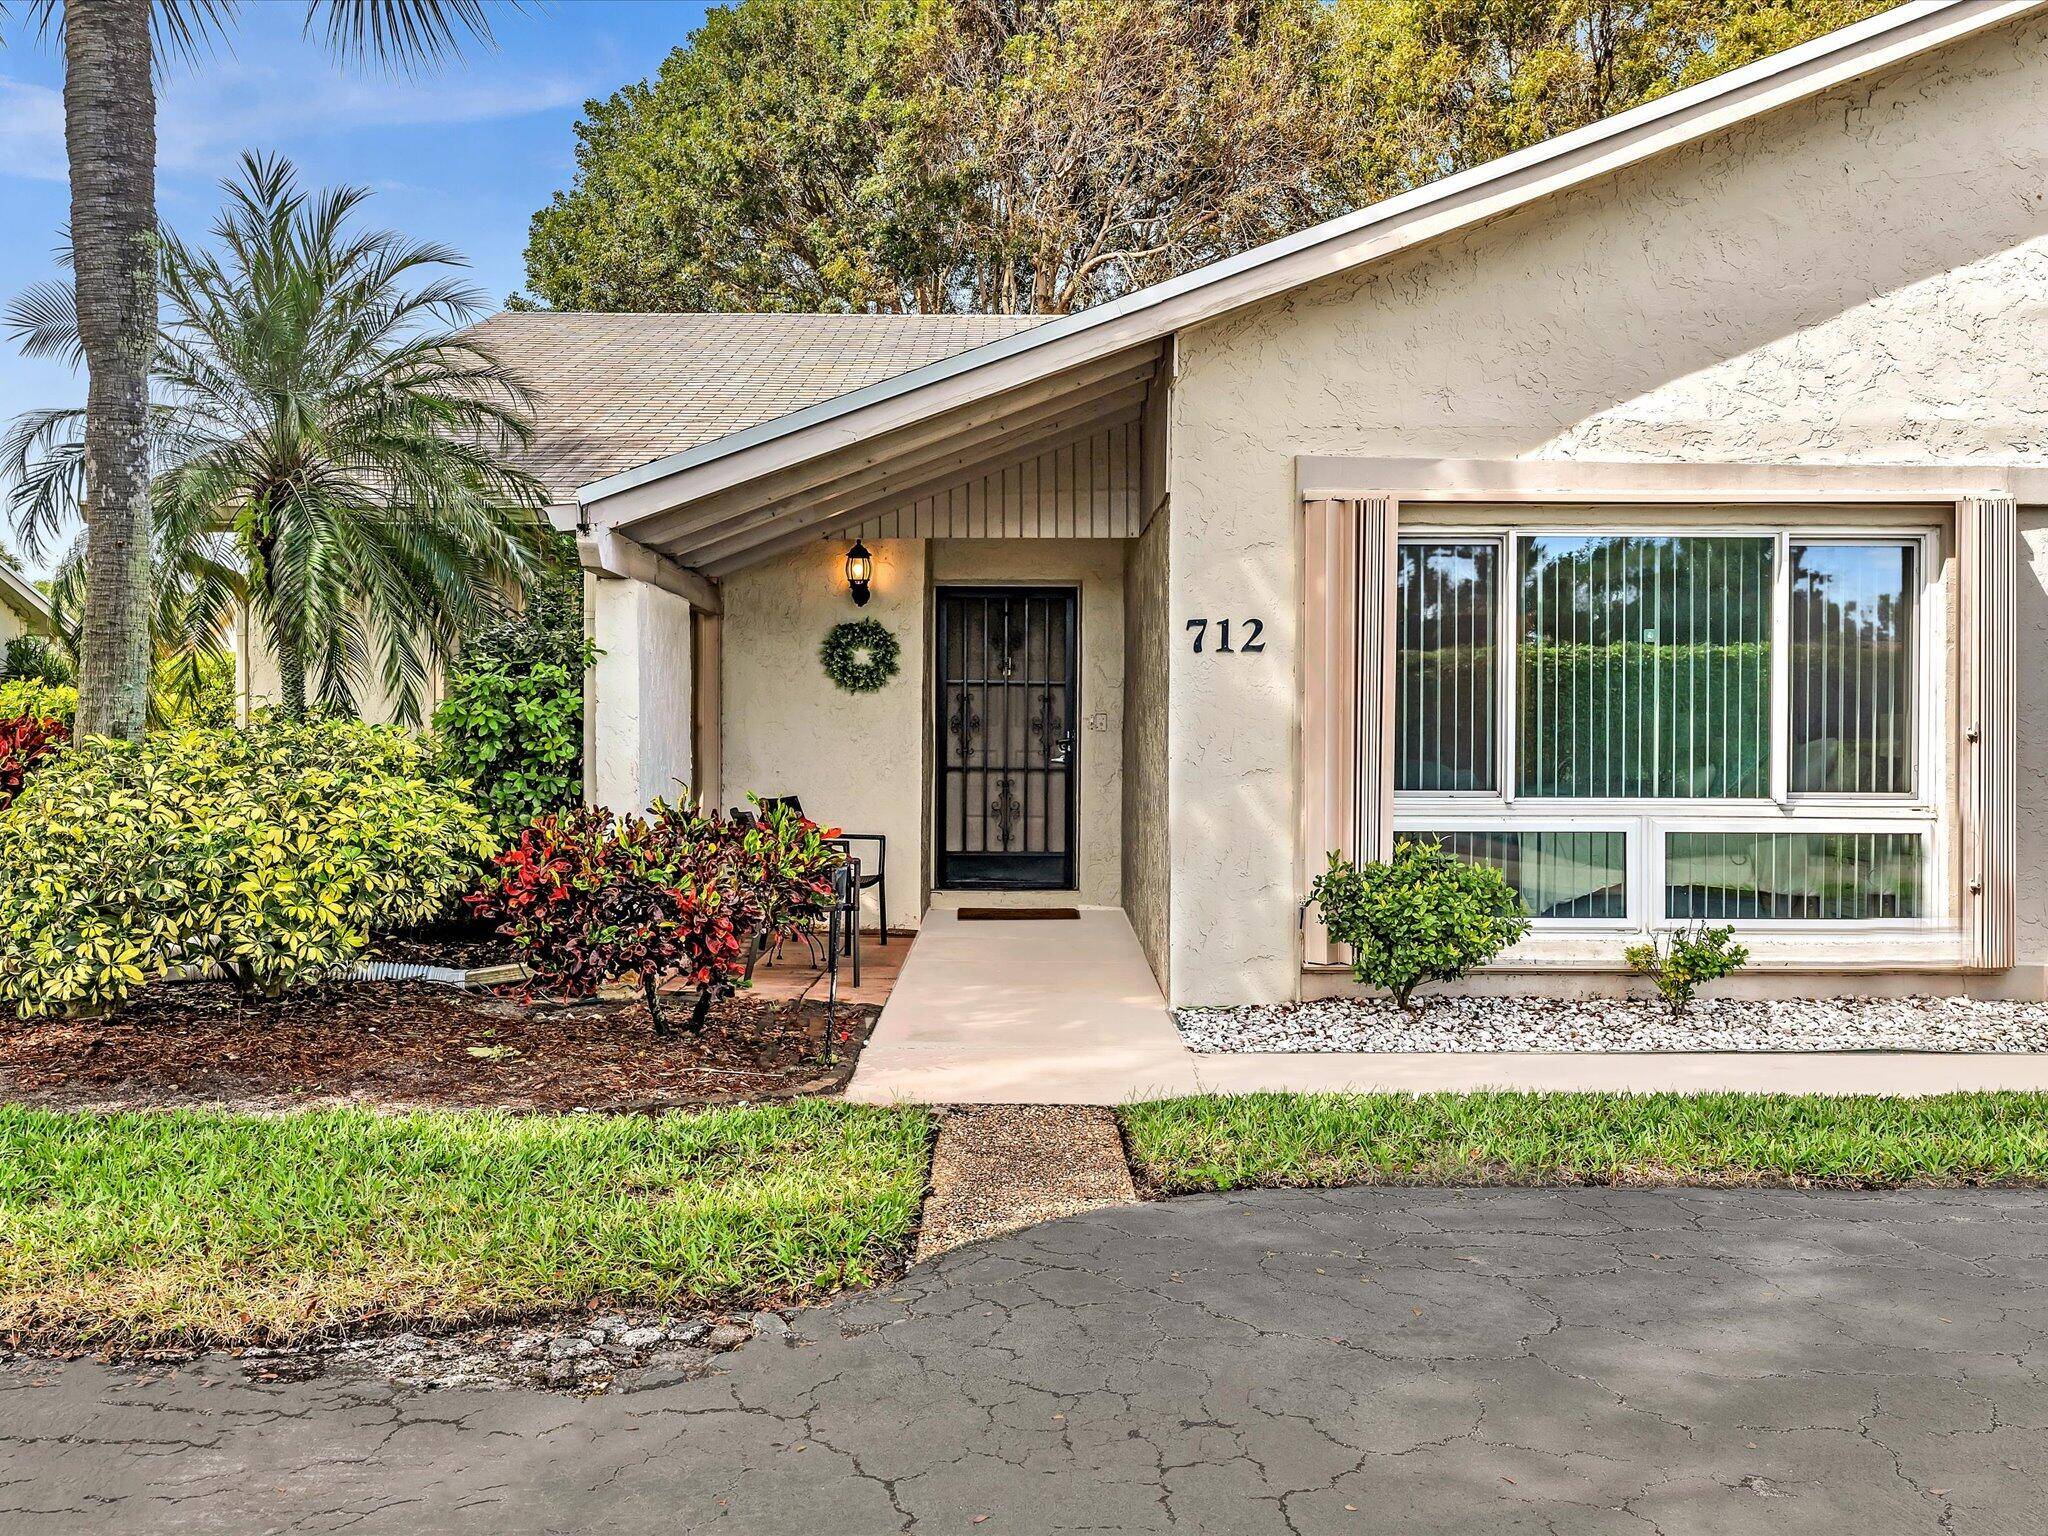 Welcome home to 712 Lago Rd, Delray Beach.